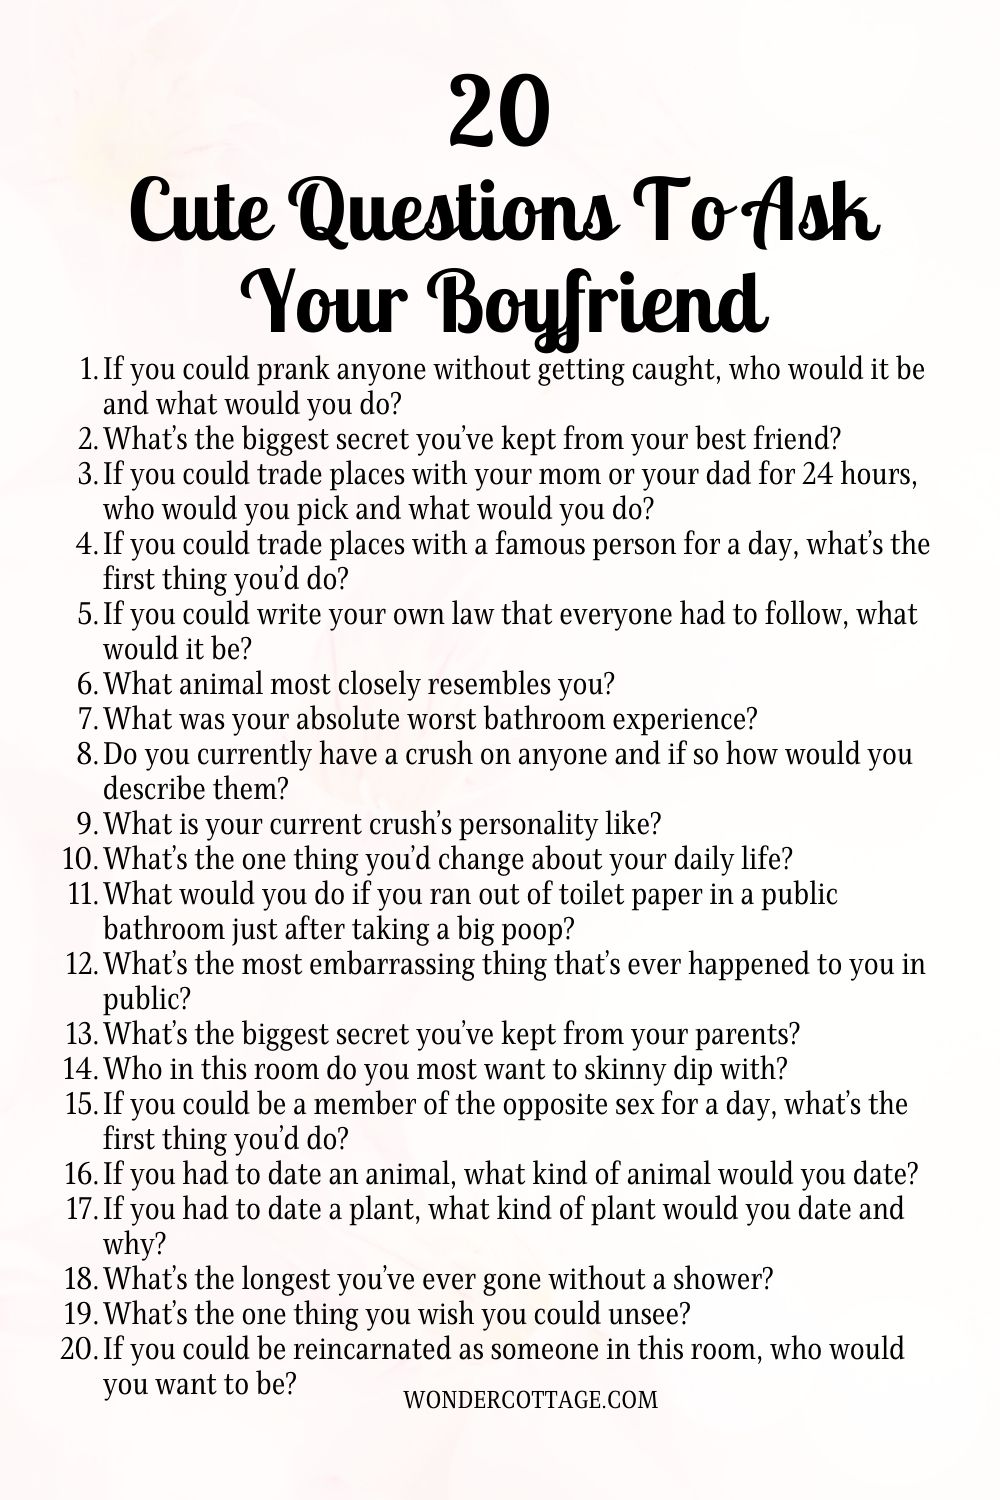 20 Cute Questions To Ask Your Boyfriend